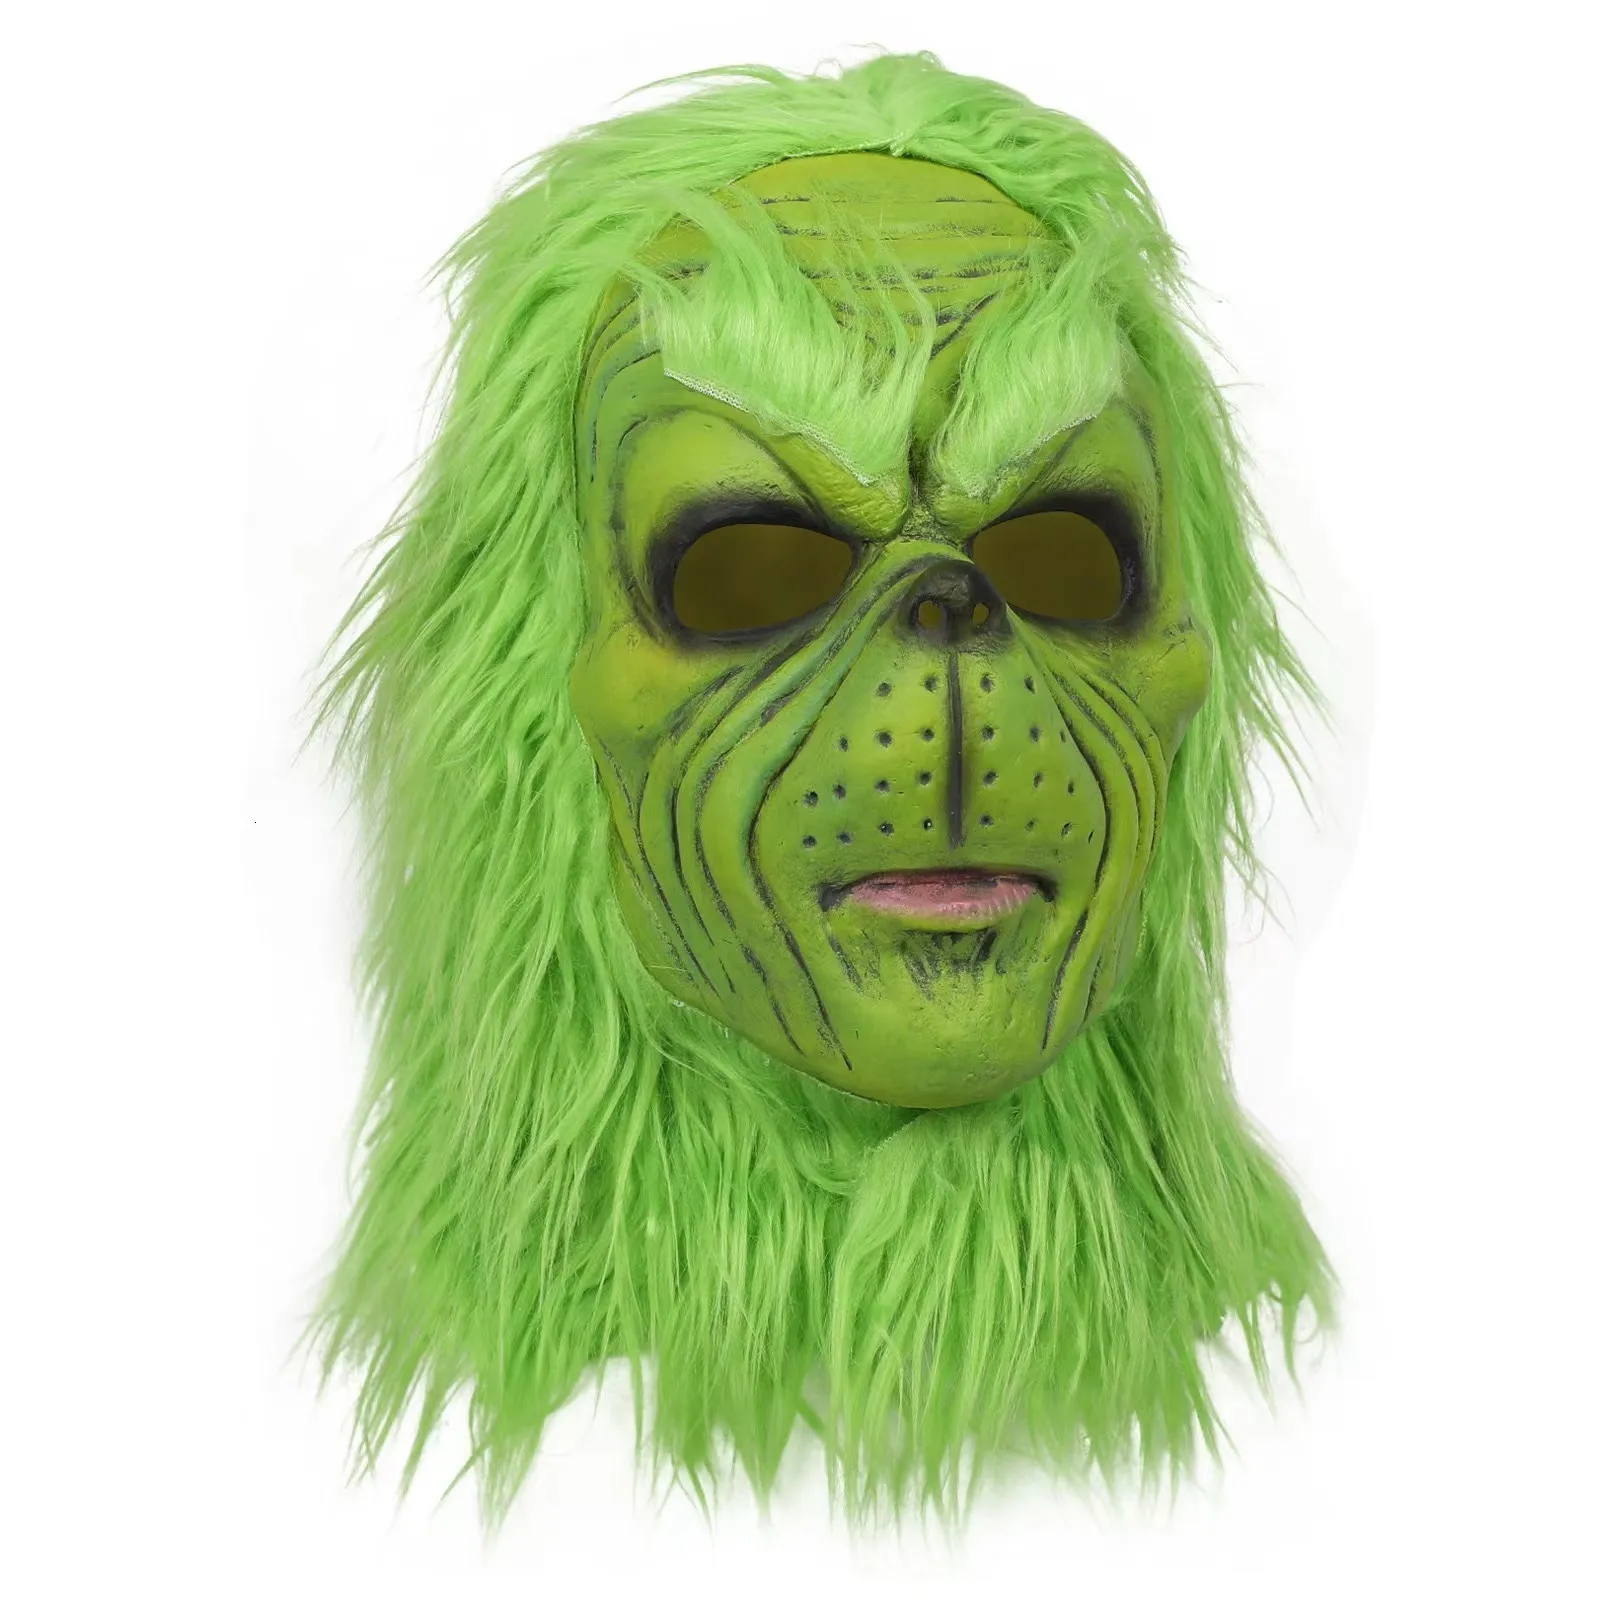 Party Masks Christmas roleplaying masks Hats Costumes Green fur Monster Latex Child RolePlaying Clothing Acce 230904